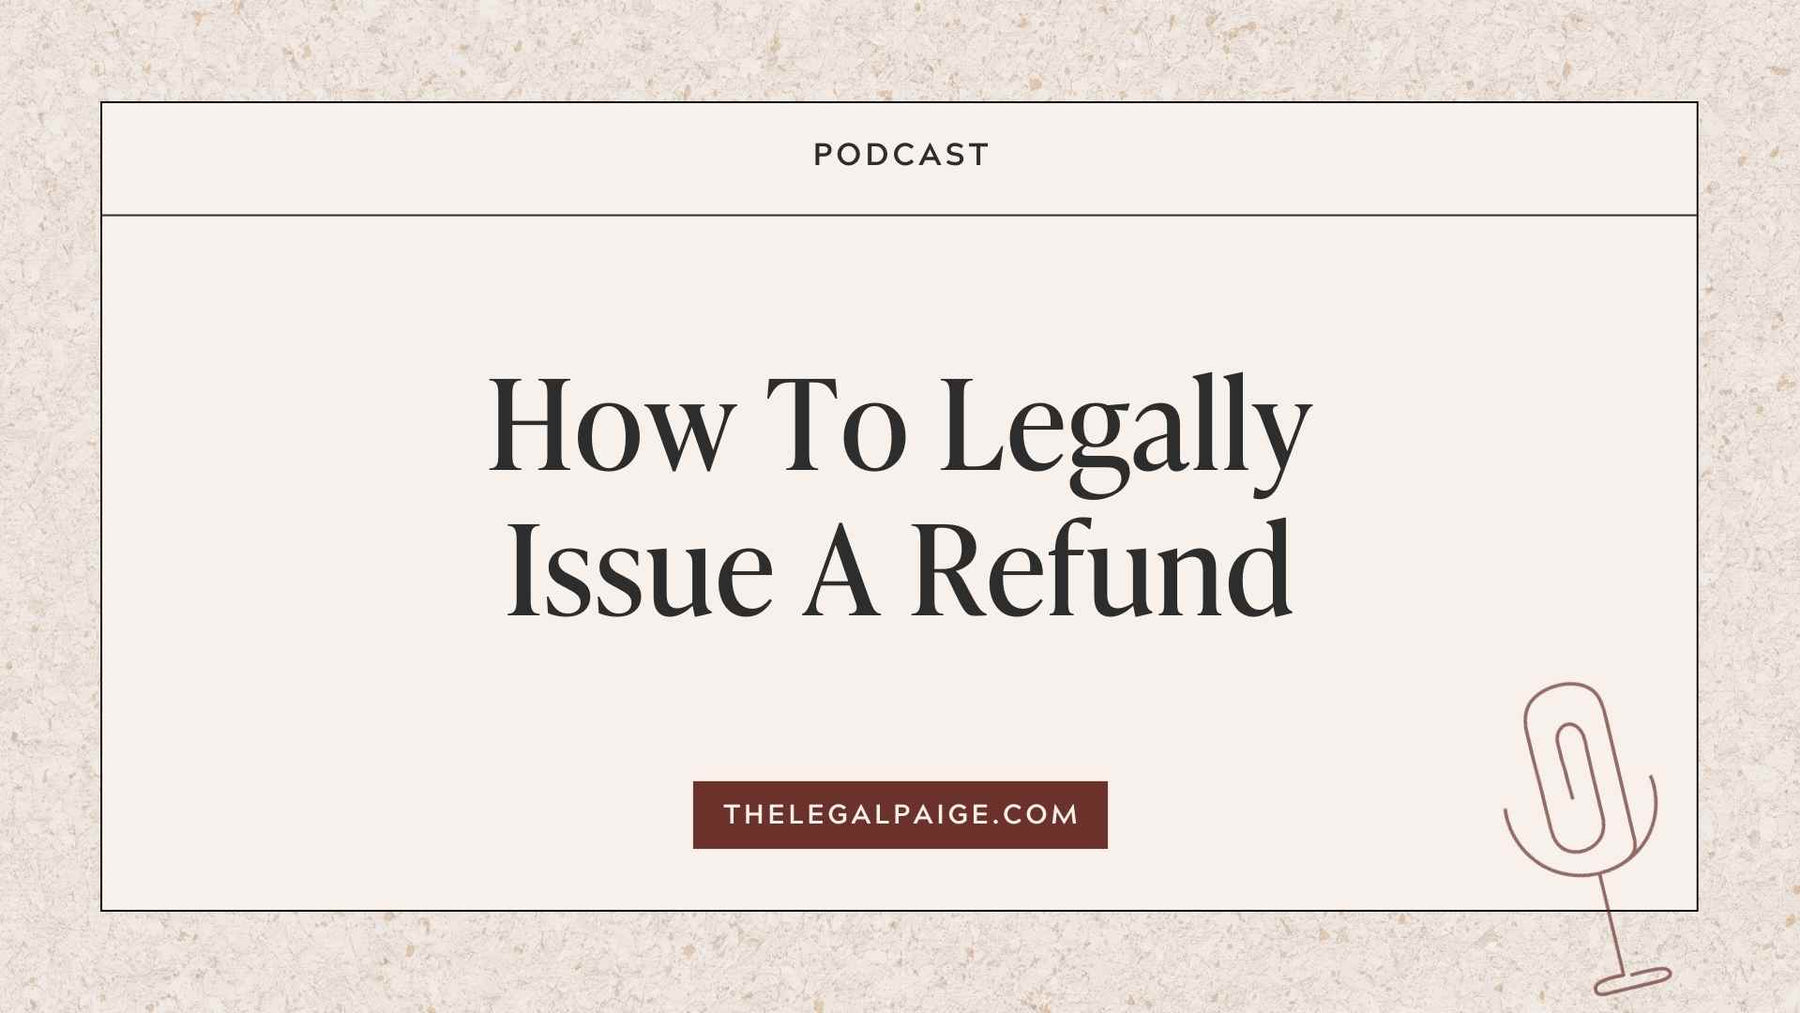 Episode 55: How To Legally Issue A Refund